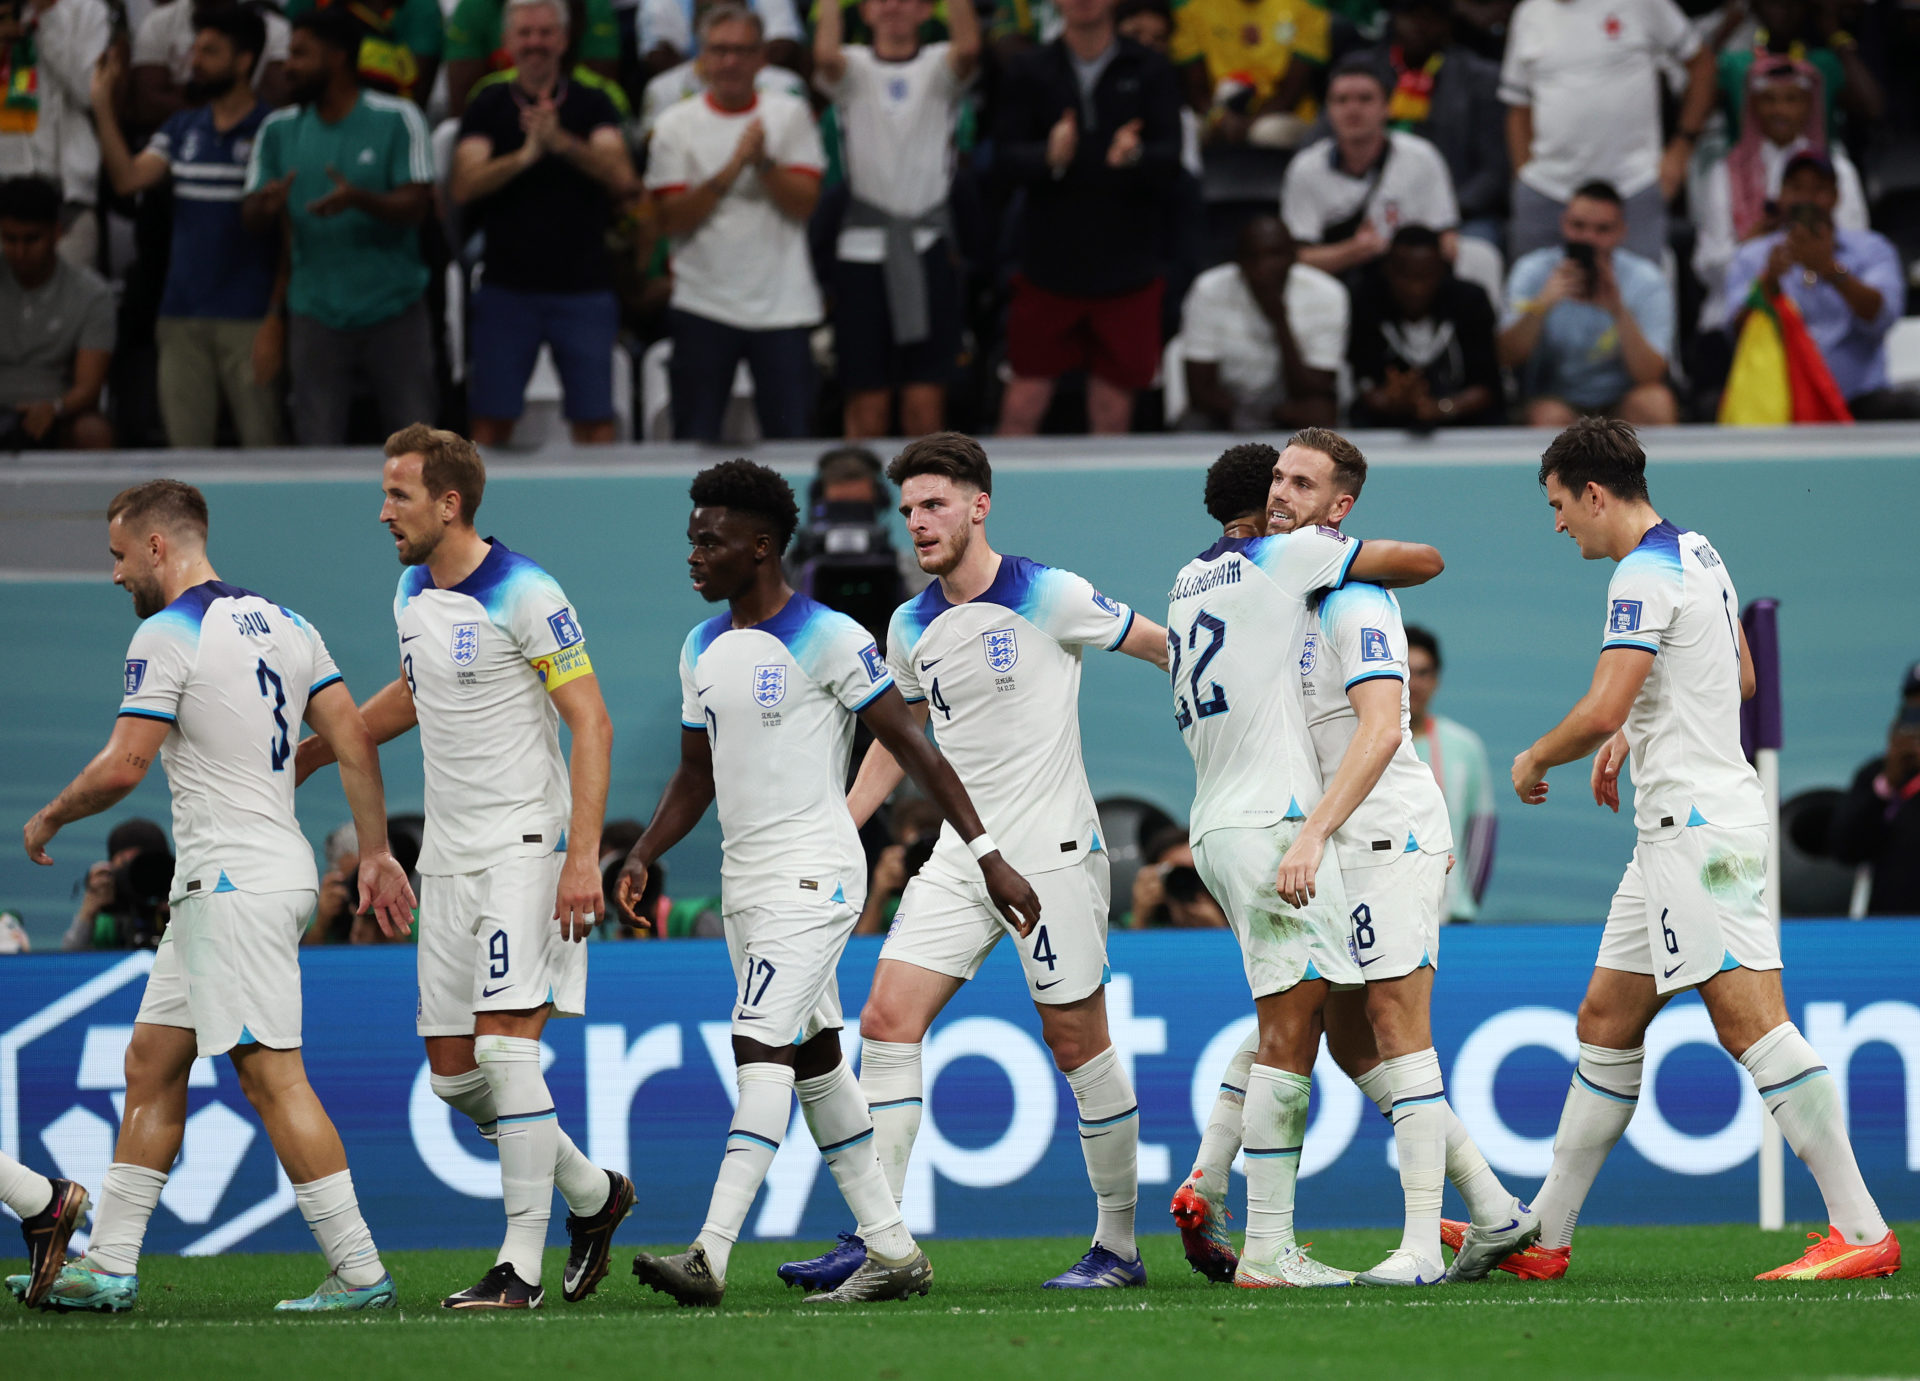 9-cap England international turned pundit delivers the worst Declan Rice take you’ll ever hear